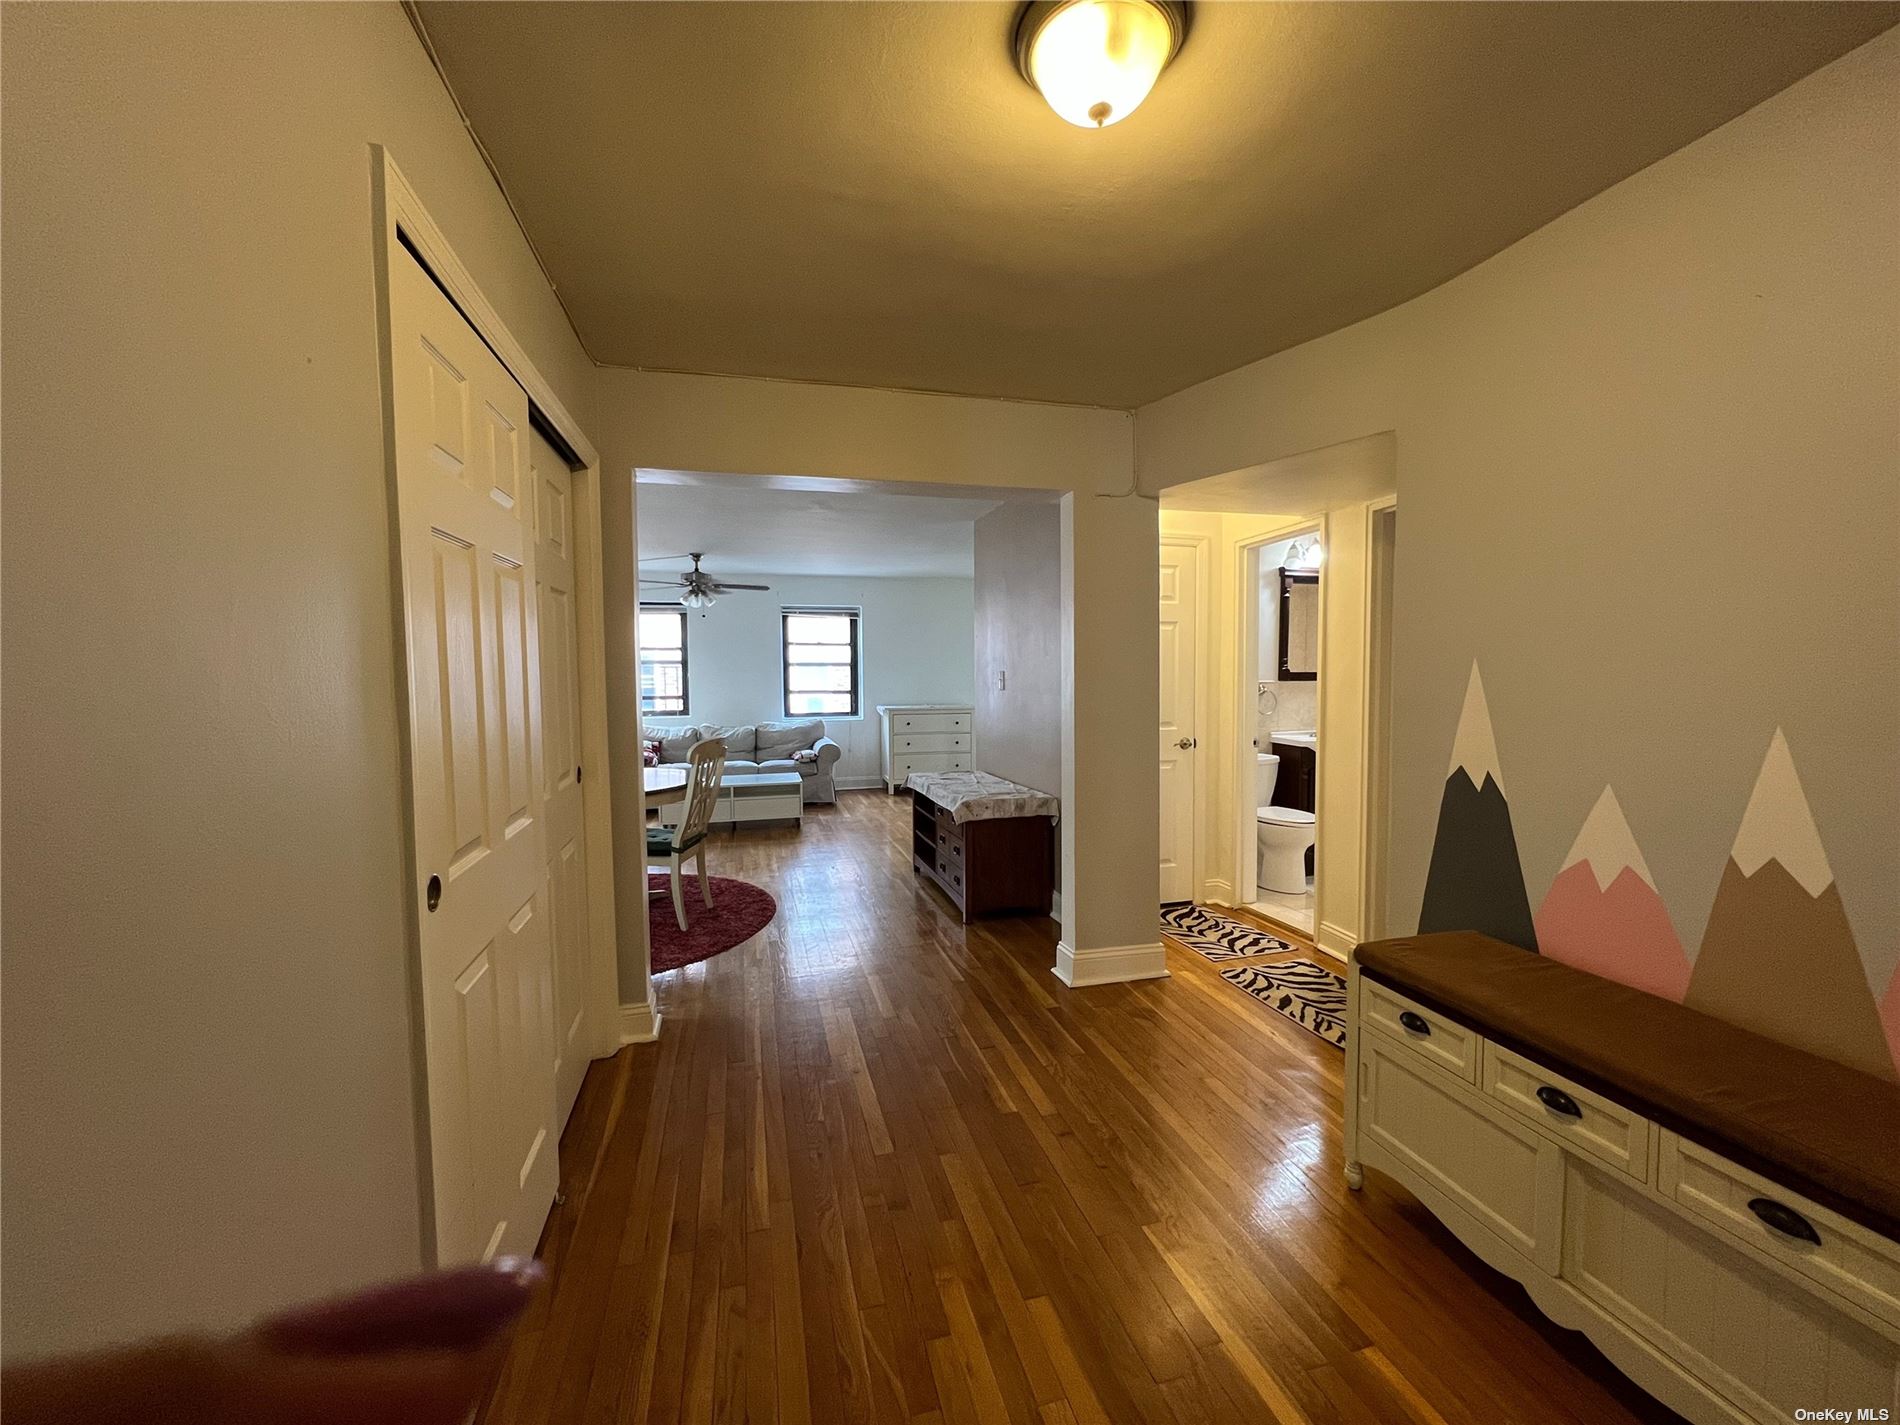 Apartment in Kew Gardens - 118th  Queens, NY 11415